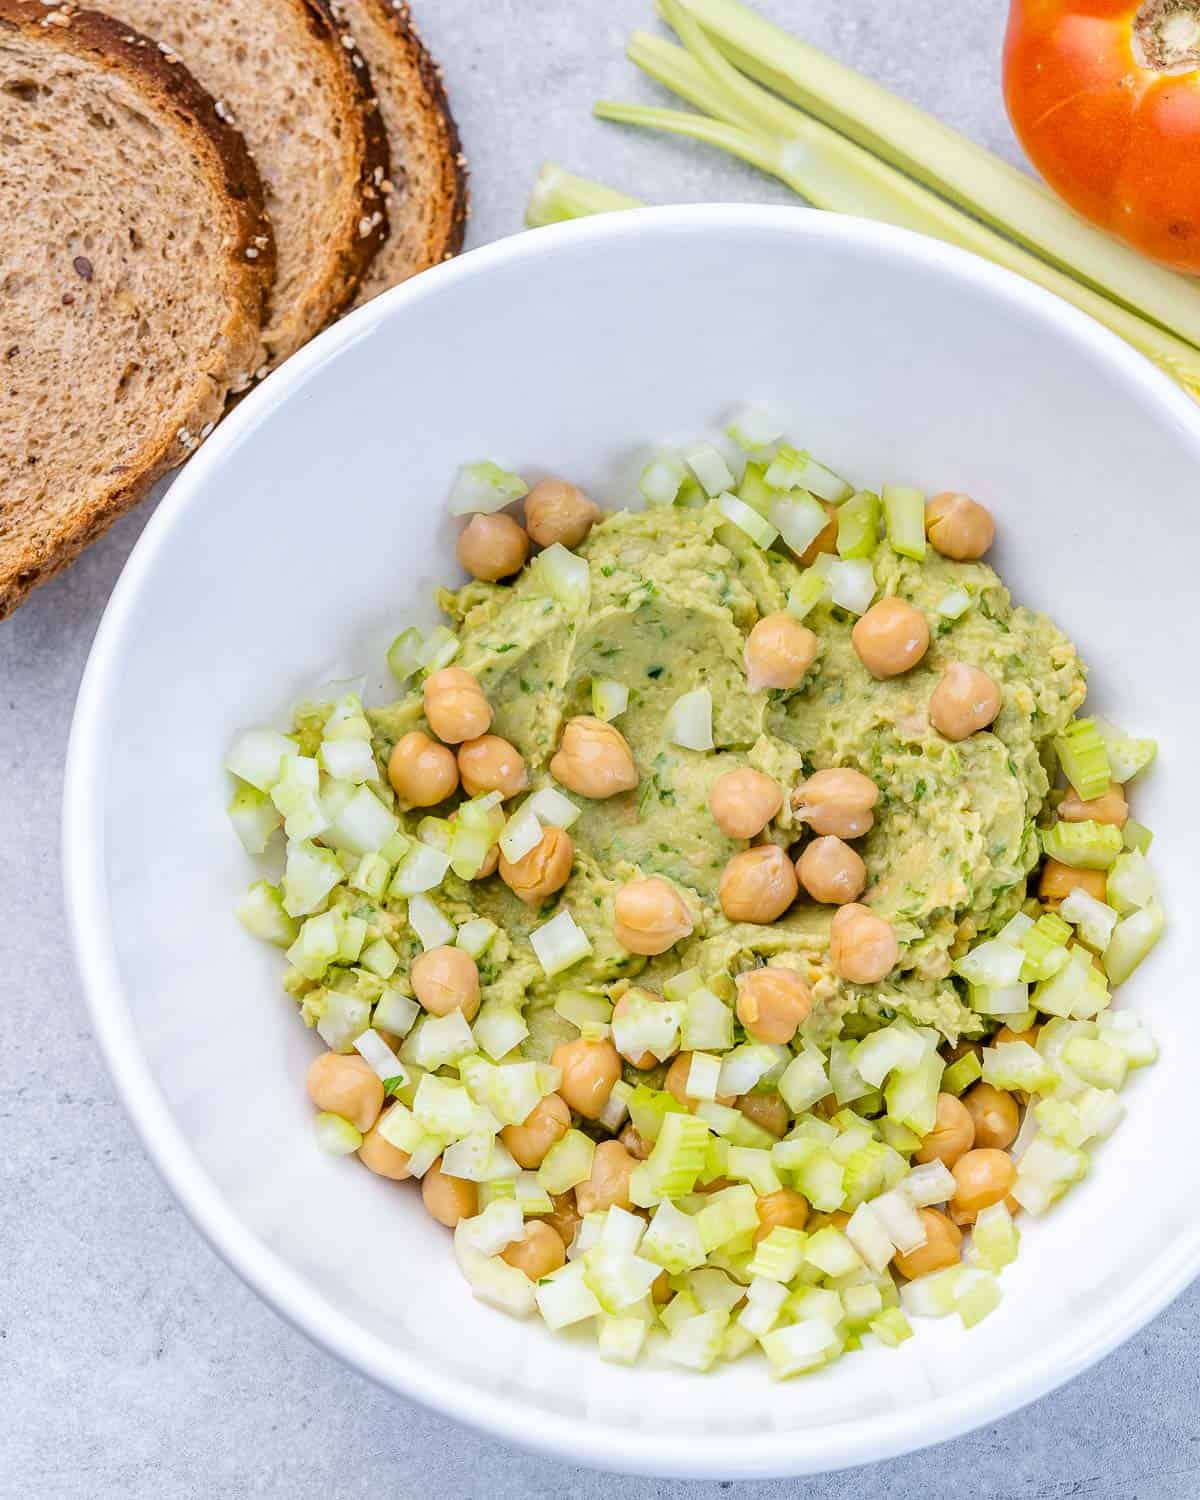 avocado smash in bowl with chickpeas and celery